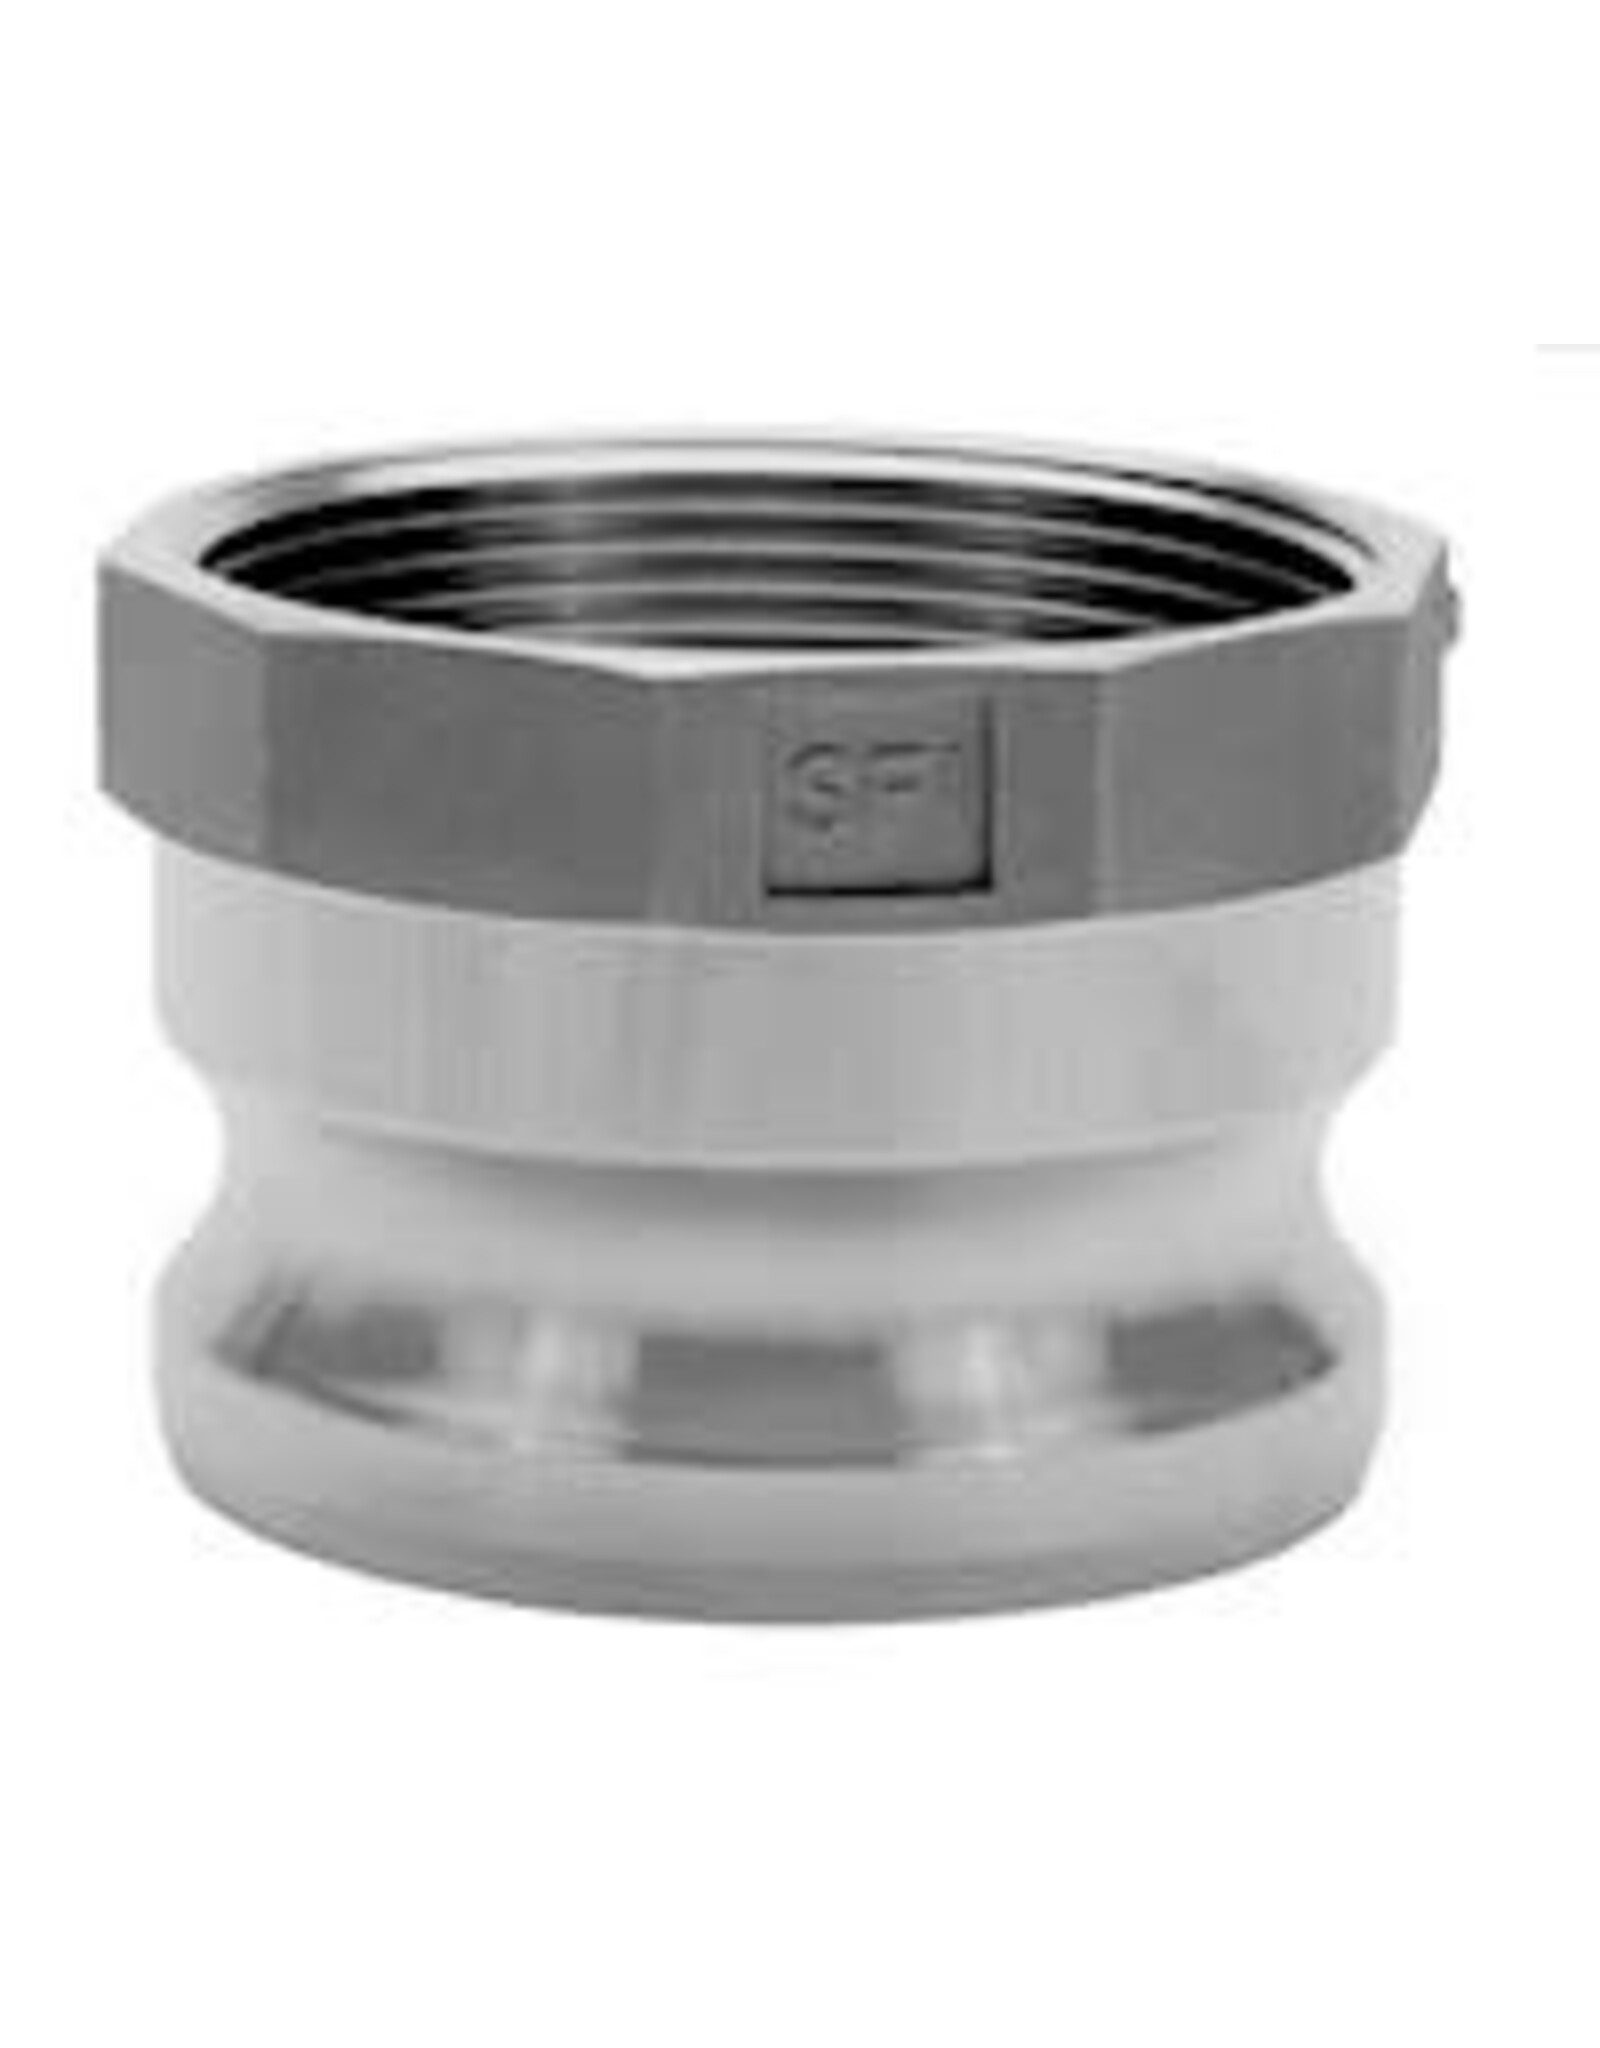 SEALFAST Aluminum Type A Female NPT x Male Adapter Cam and Groove Coupling